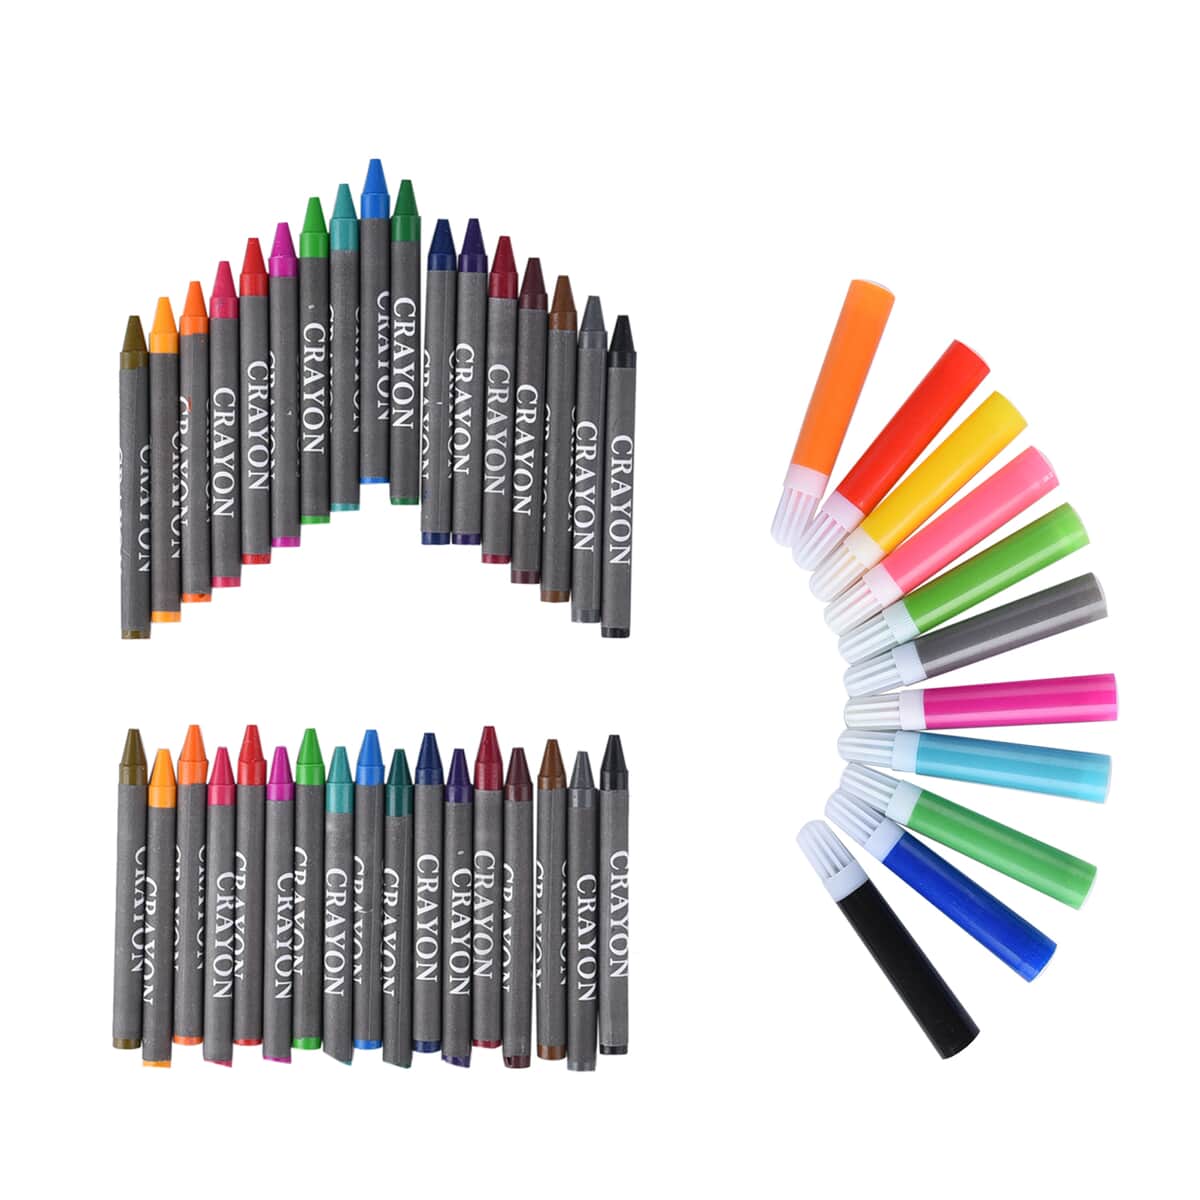 109 Piece Deluxe Art Supply Set (Coloring Pencils, Crayons, Oil Pastels, Markers, Water Paint, Eraser, Pencil, Sharpener, Liquid Glue and White Glue) image number 4